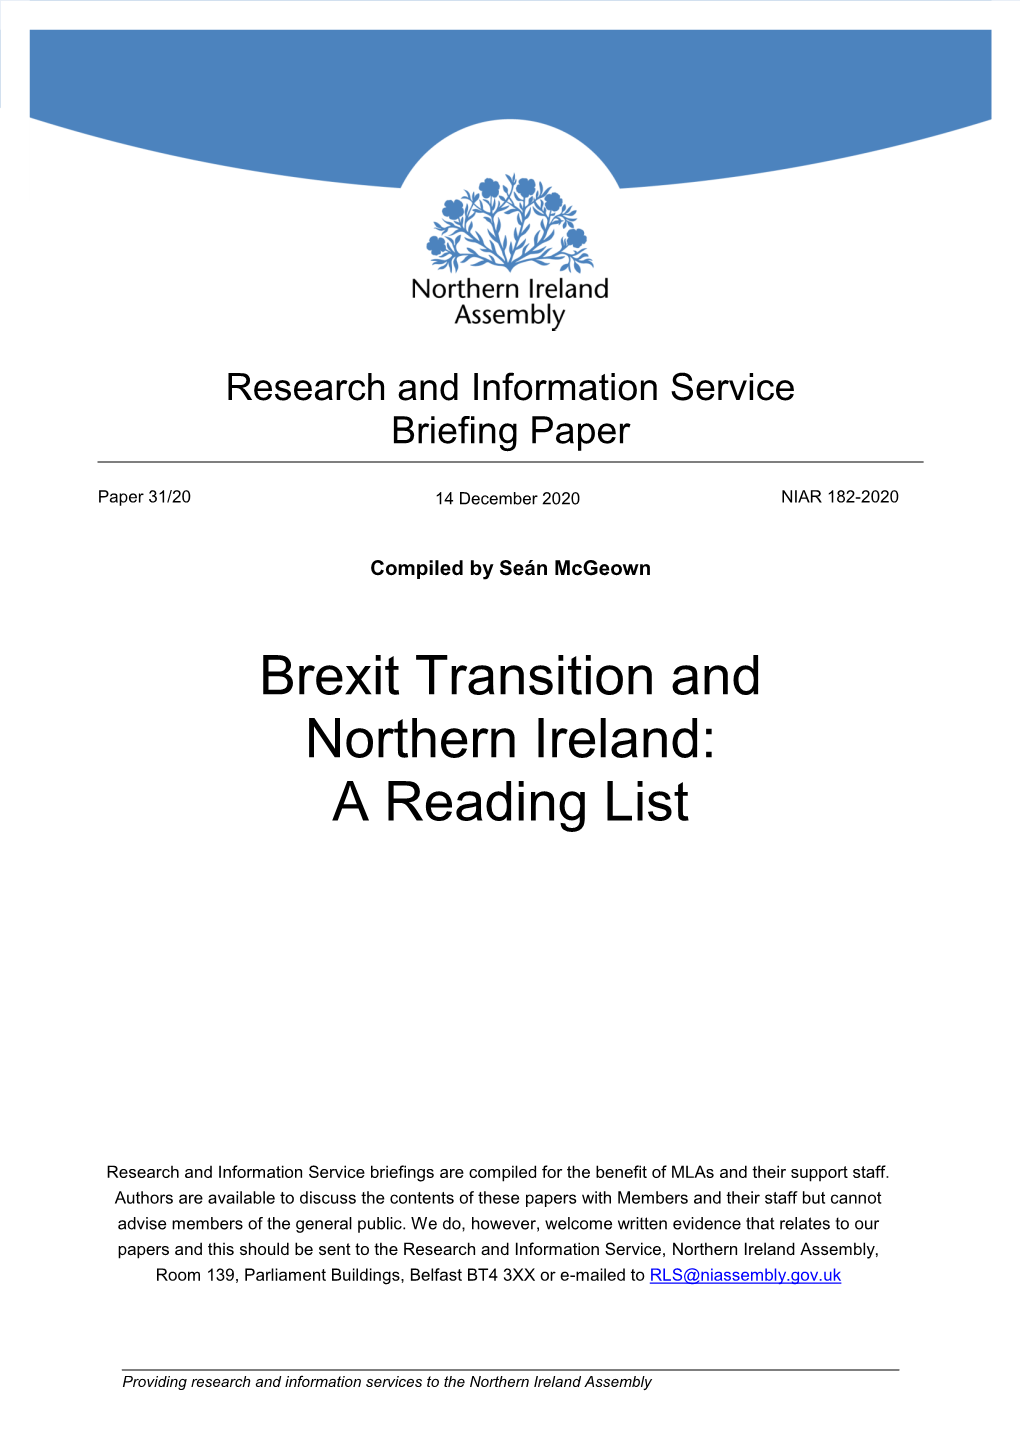 Brexit Transition and Northern Ireland: a Reading List